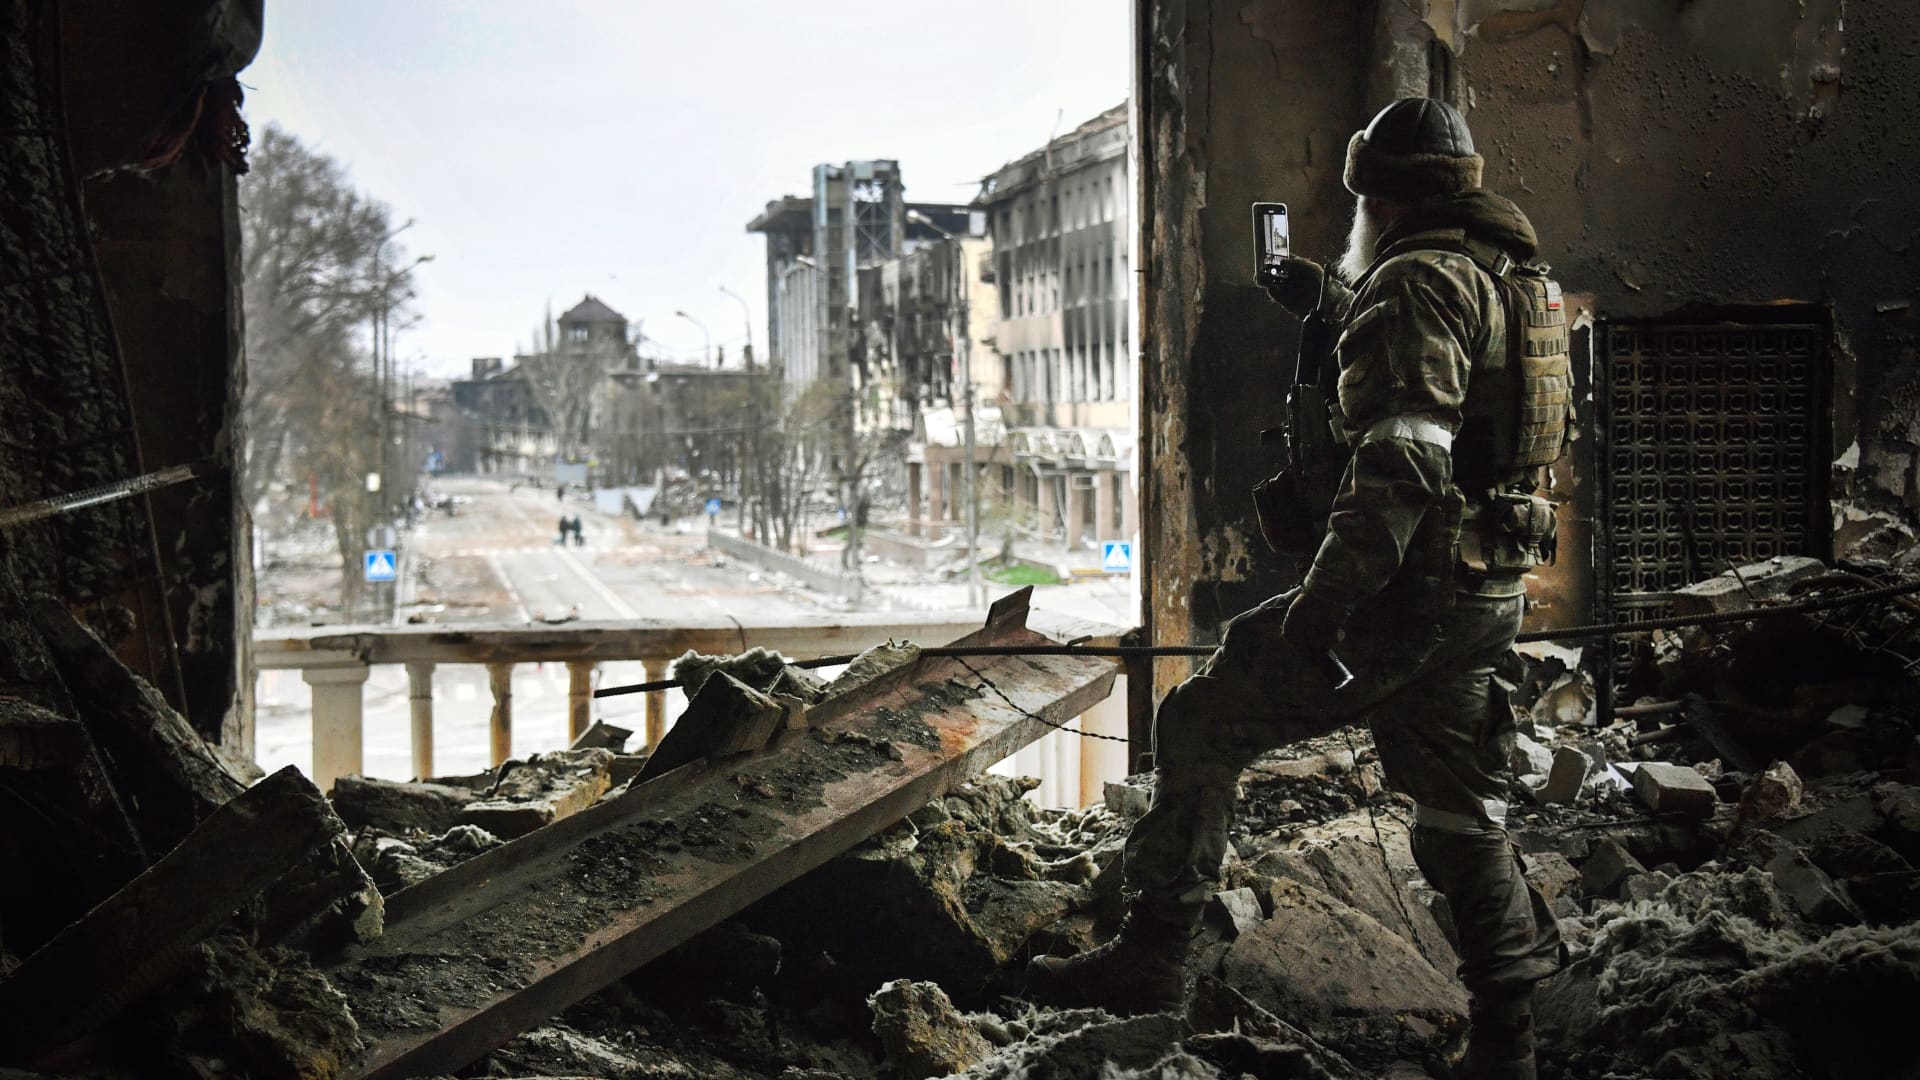 A Russian soldier patrols the Mariupol drama theatre, hit March 16 by an airstrike, on April 12, 2022 in Mariupol, as Russian troops intensify a campaign to take the strategic port city. Editor's note: This picture was taken during a trip organized by the Russian military.